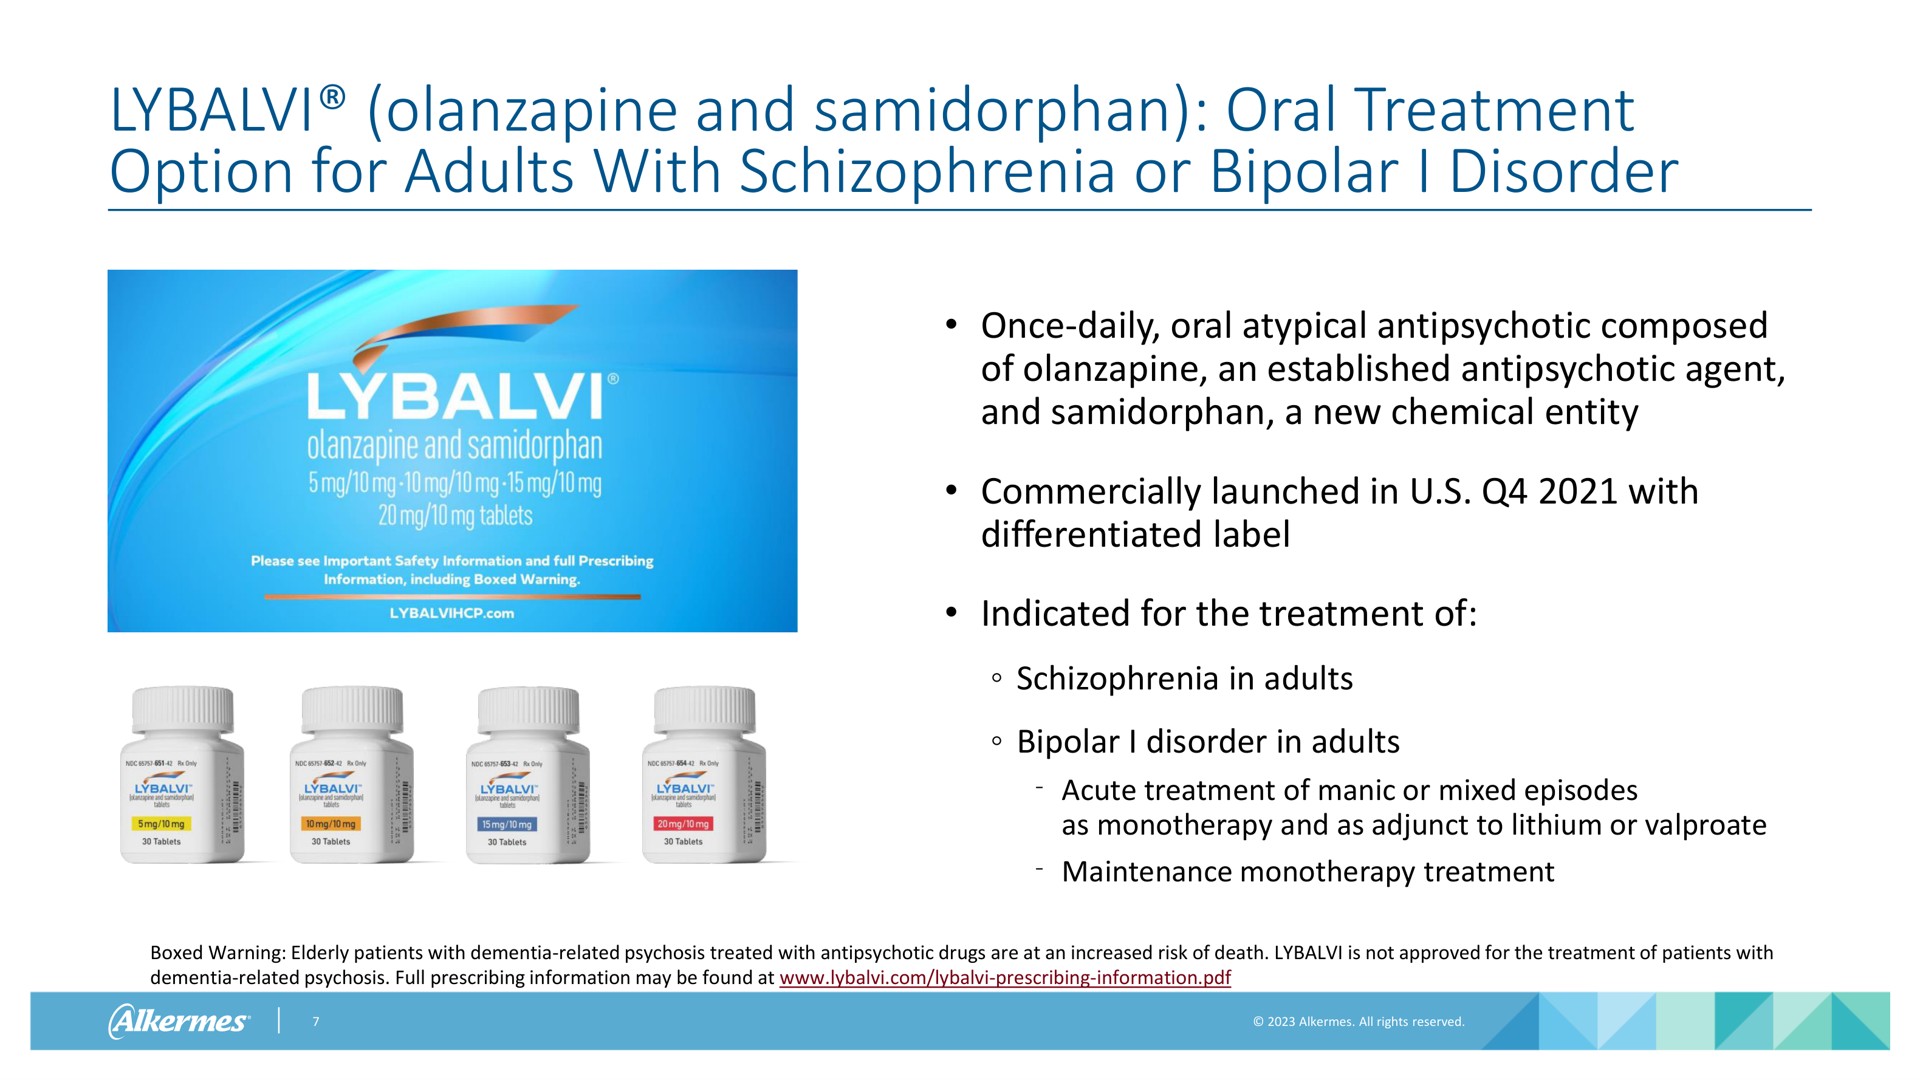 and oral treatment option for adults with schizophrenia or bipolar i disorder | Alkermes